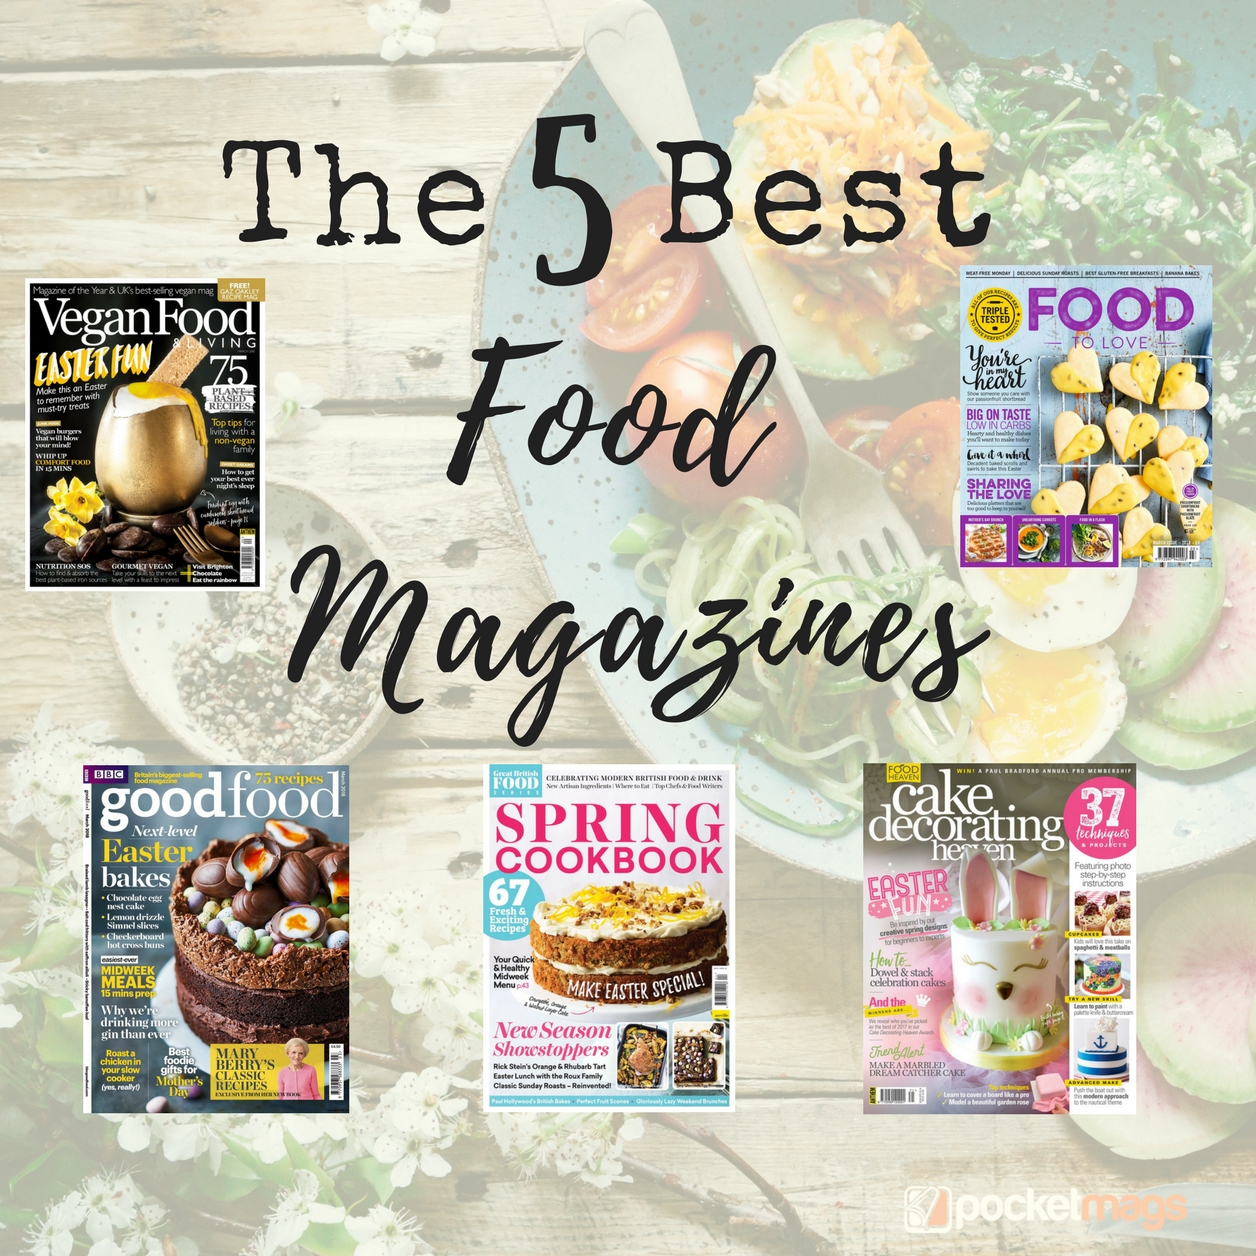 The 5 Best Food Magazines